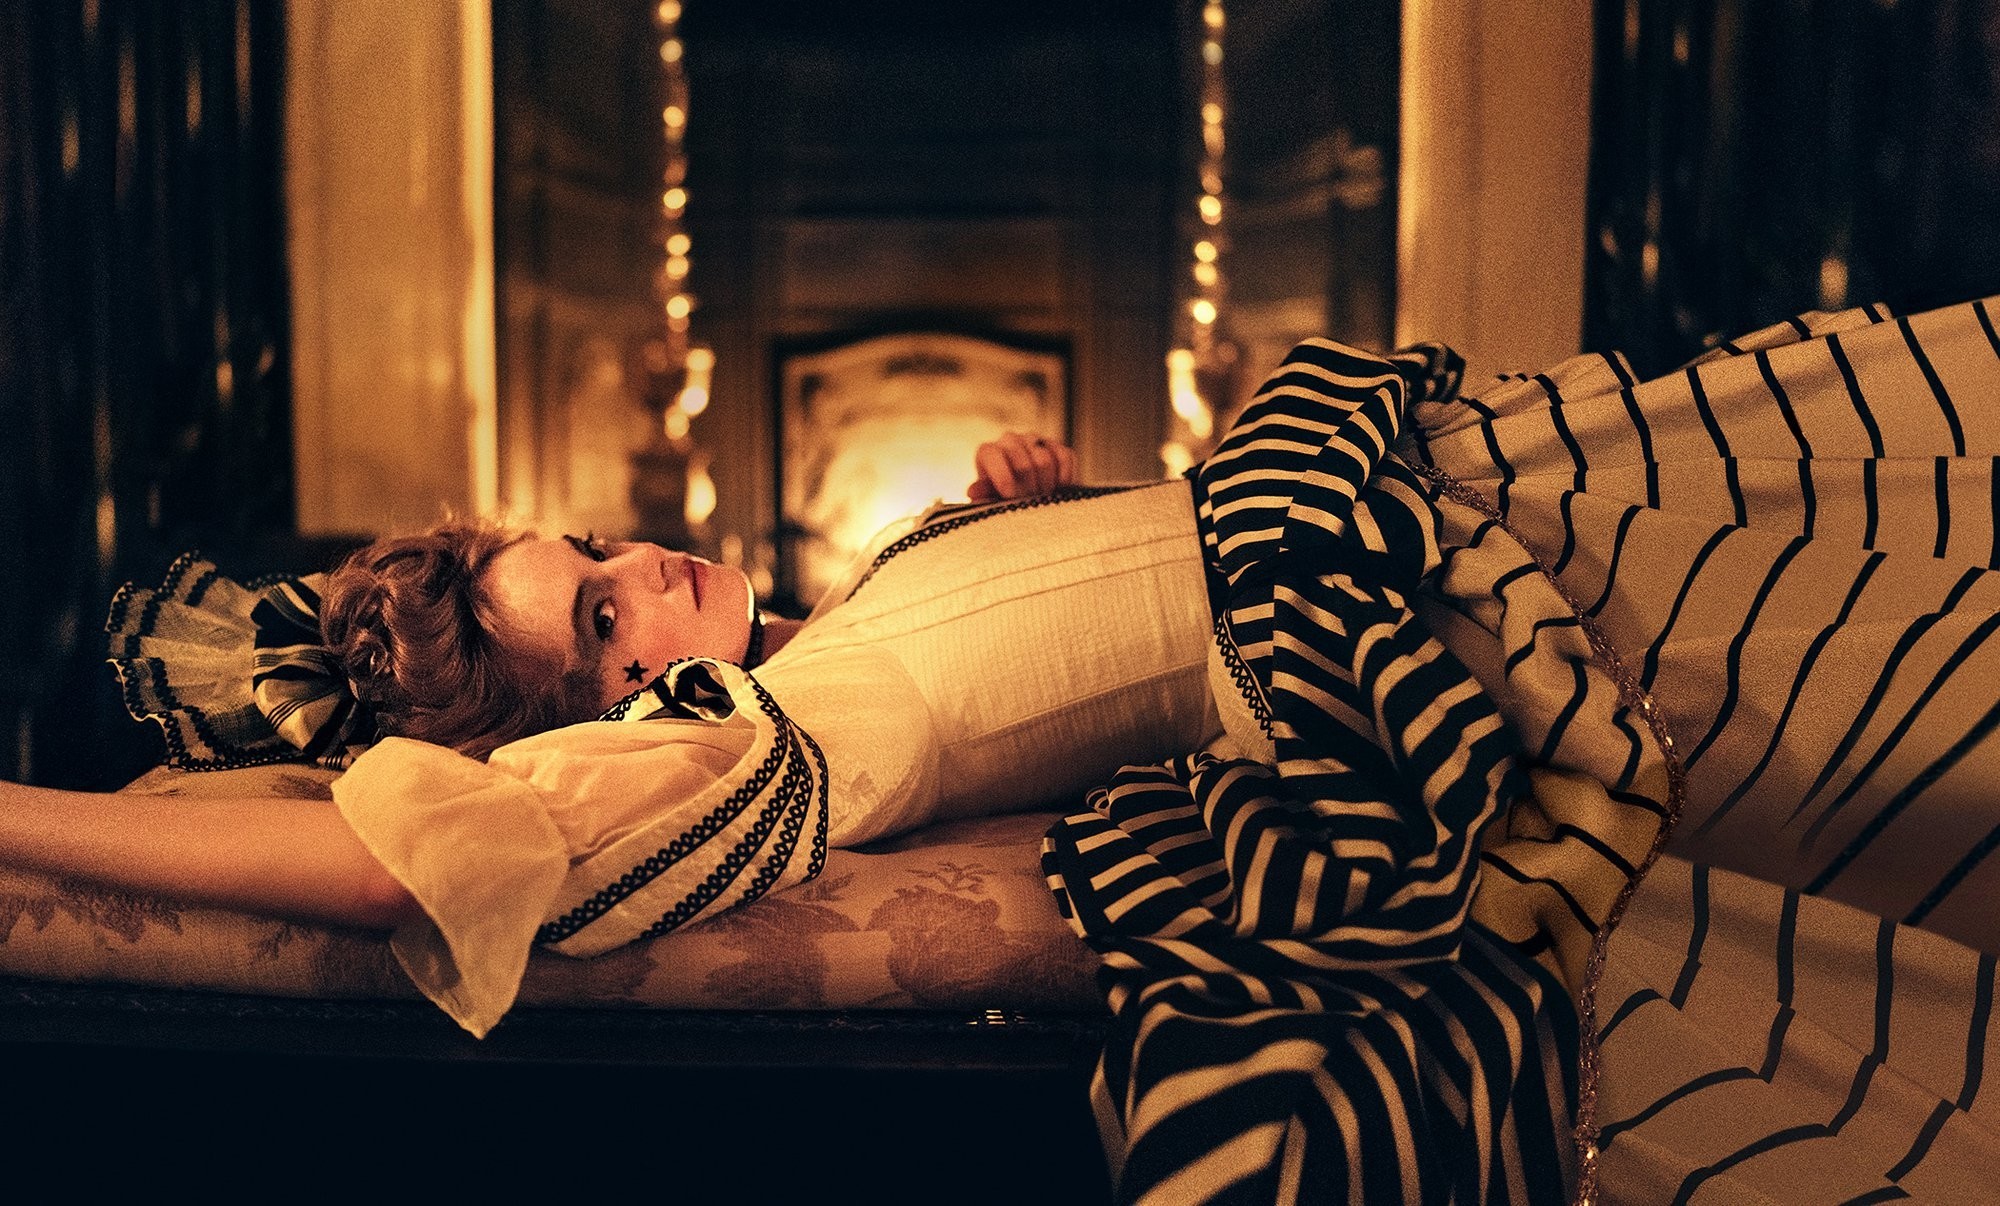 Academy Award winner Emma Stone plays the impoverished,  fallen-from-grace Abigail, the daughter of a one-time nobleman who lost her in a card game, in Yorgos Lanthimos’ The Favourite. - ATSUSHI NISHIJIMA/COURTESY OF TWENTIETH CENTURY FOX